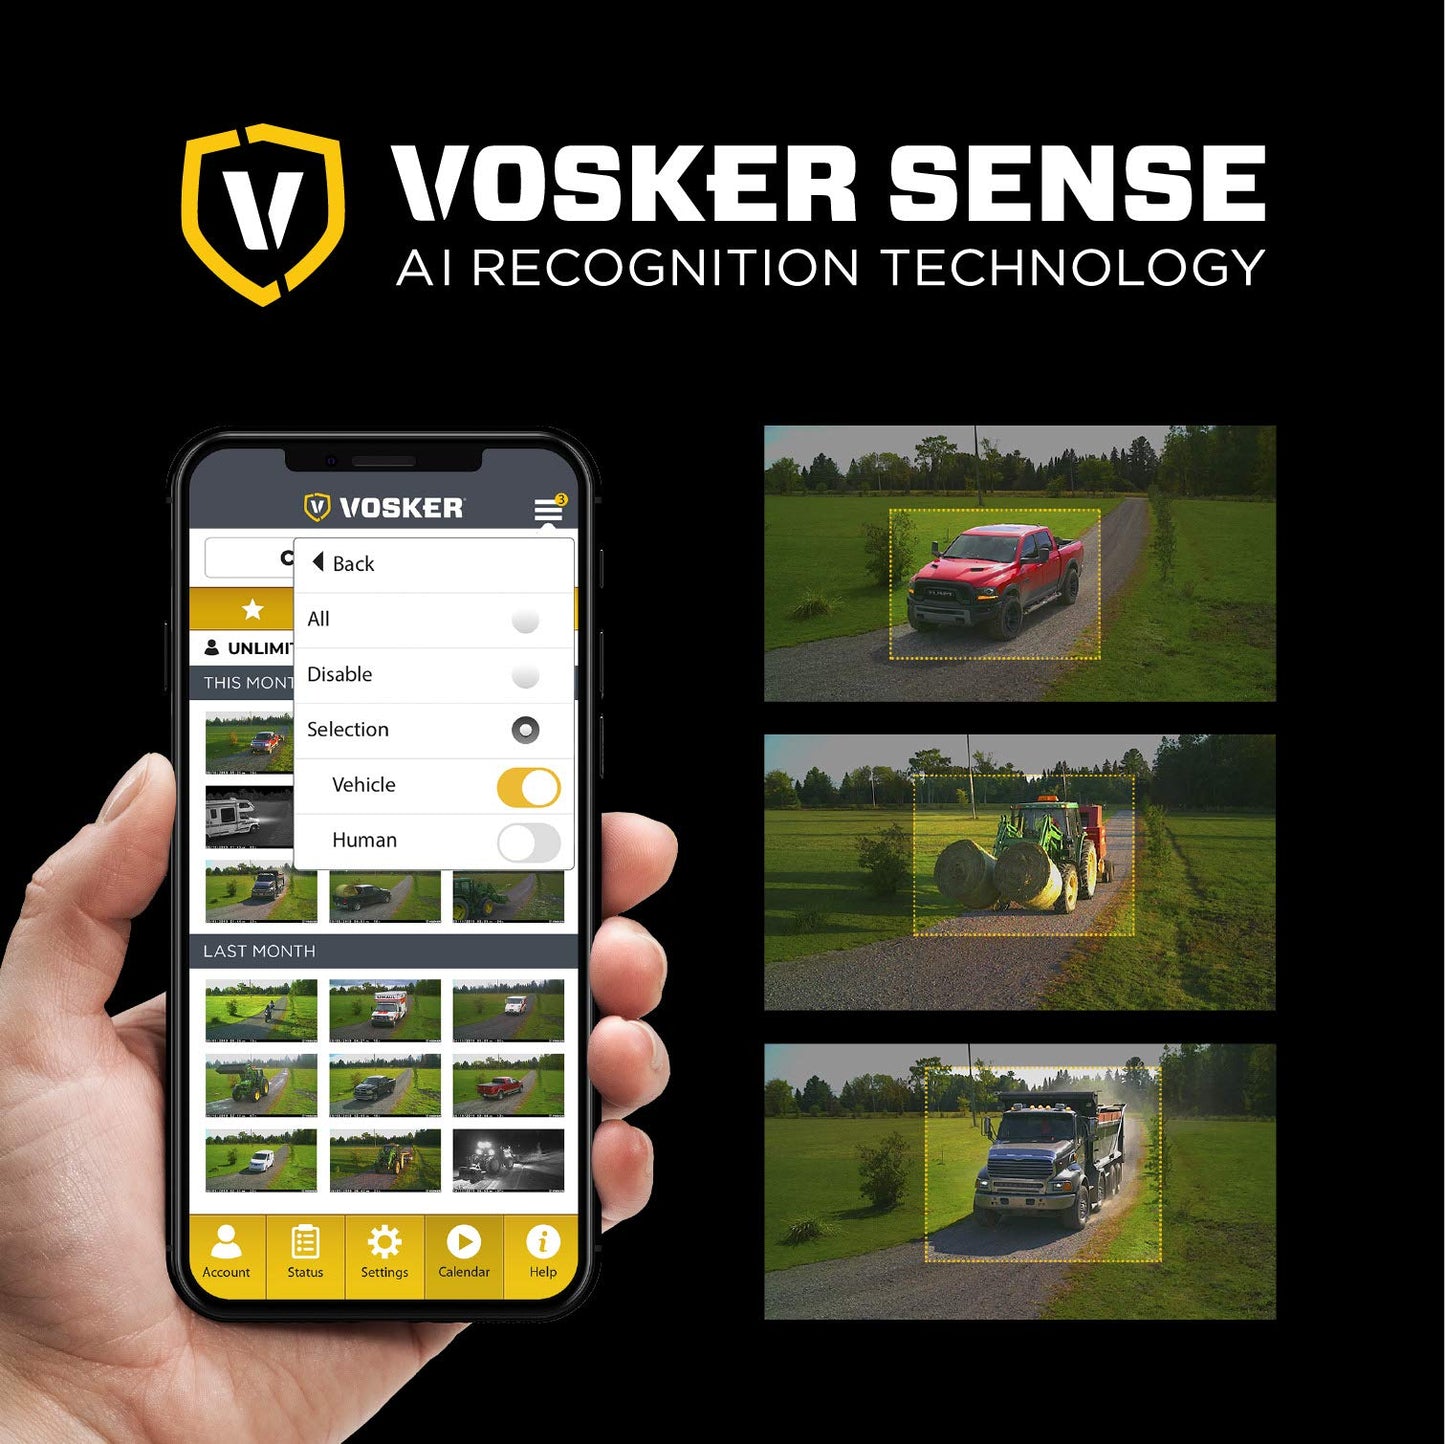 Vosker V200-US HD Cellular Security Surveillance Camera Pack - No Wi-Fi Required, Built-in Solar Panel, Weatherproof, Mobile Phone Photo Notifications